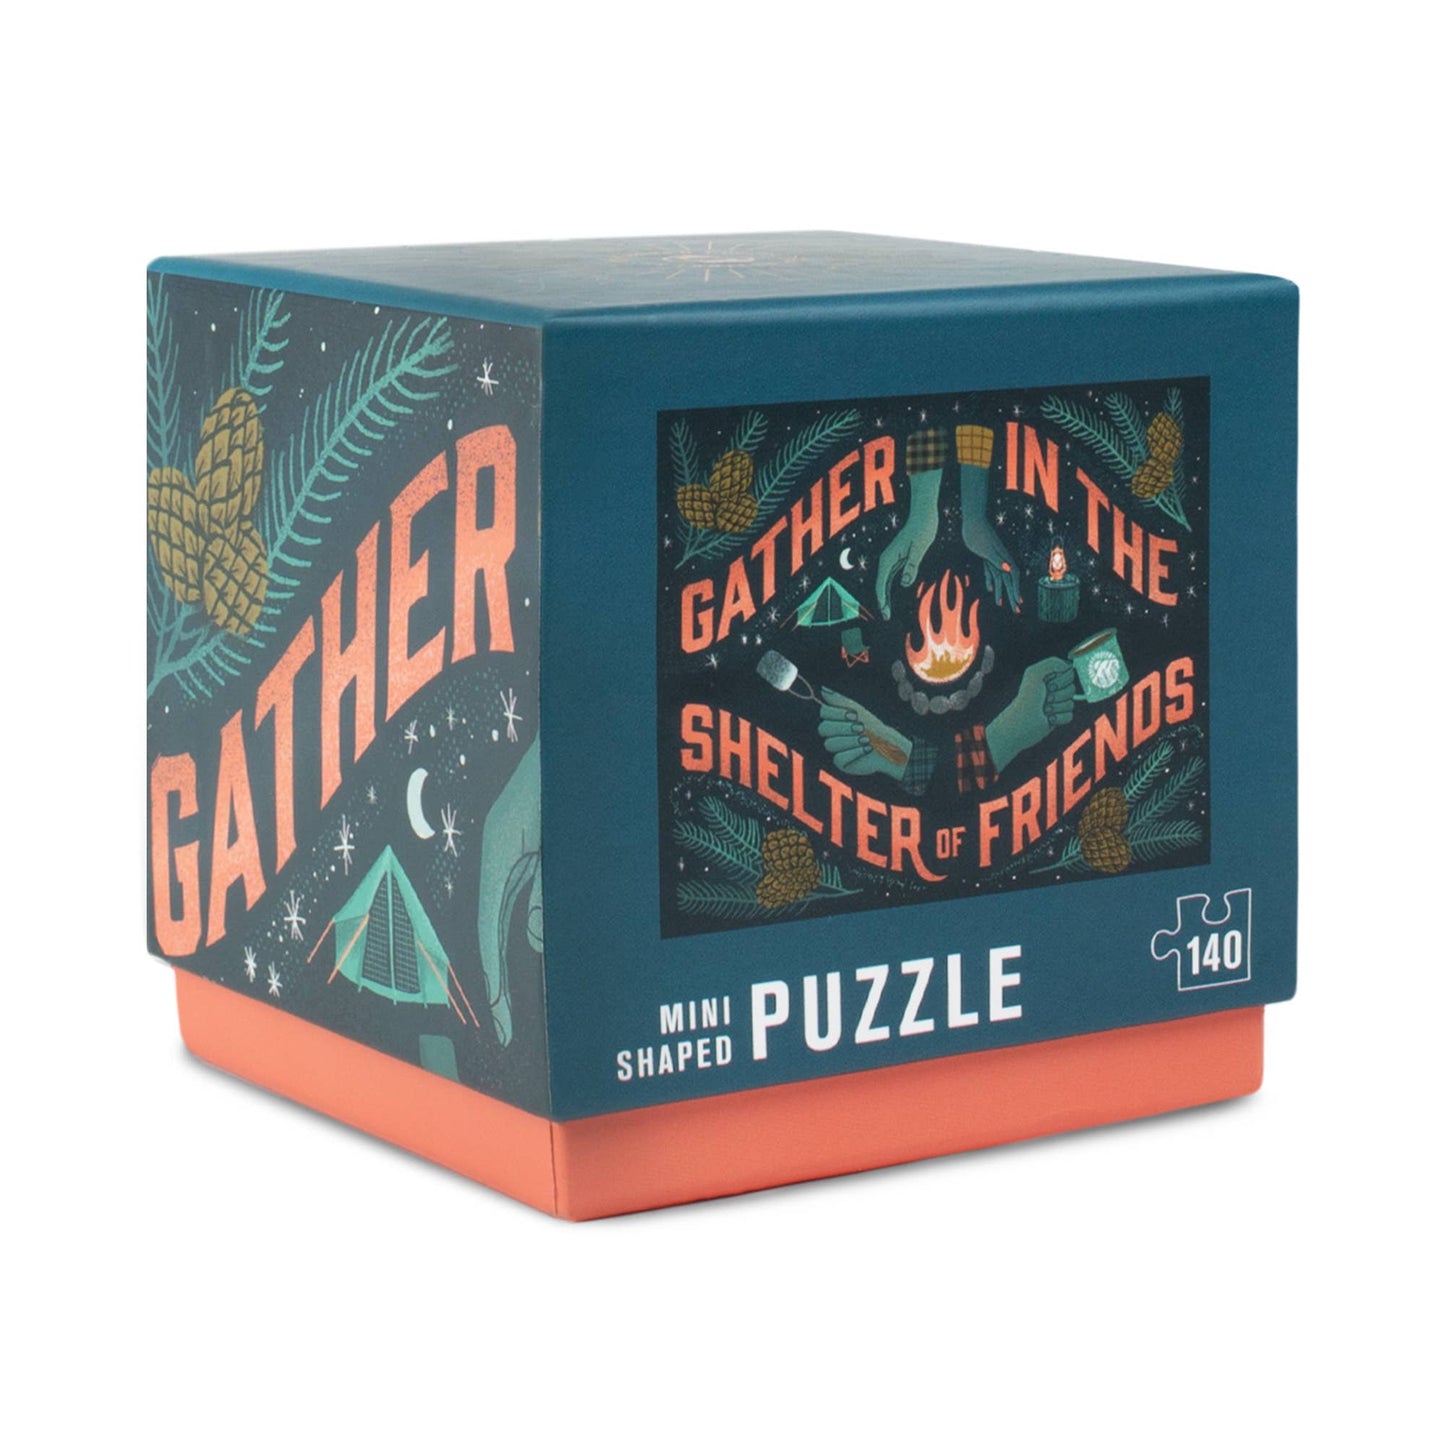 MINI JIGSAW PUZZLE, Gather in the Shelter of Friends